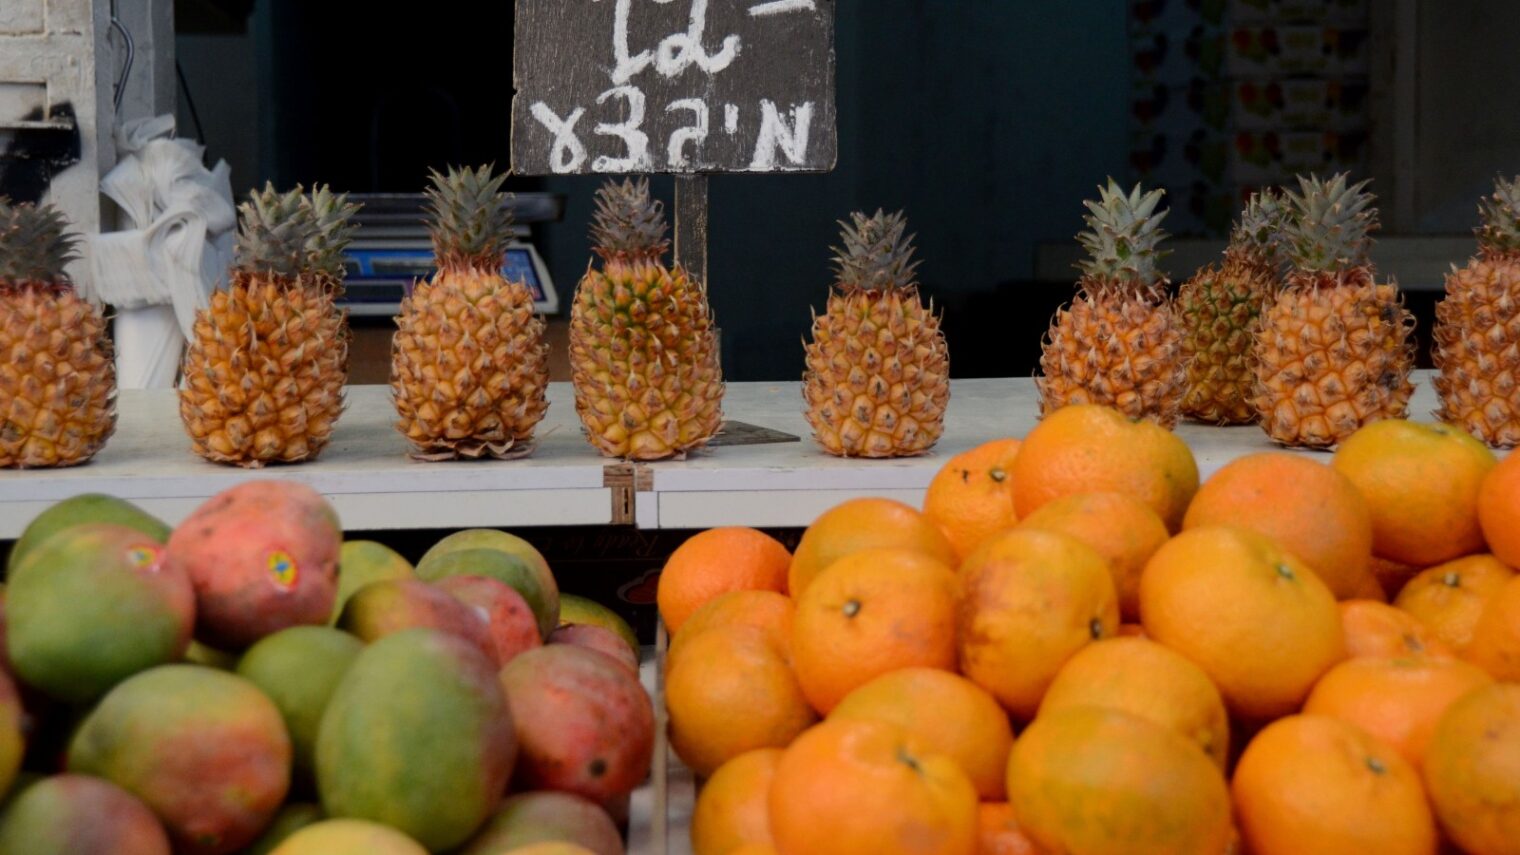 Pineapples, mangos and oranges displayed for purchase in Machane Yehuda market in Jerusalem. Photo by Danna Hymanson/Flash90